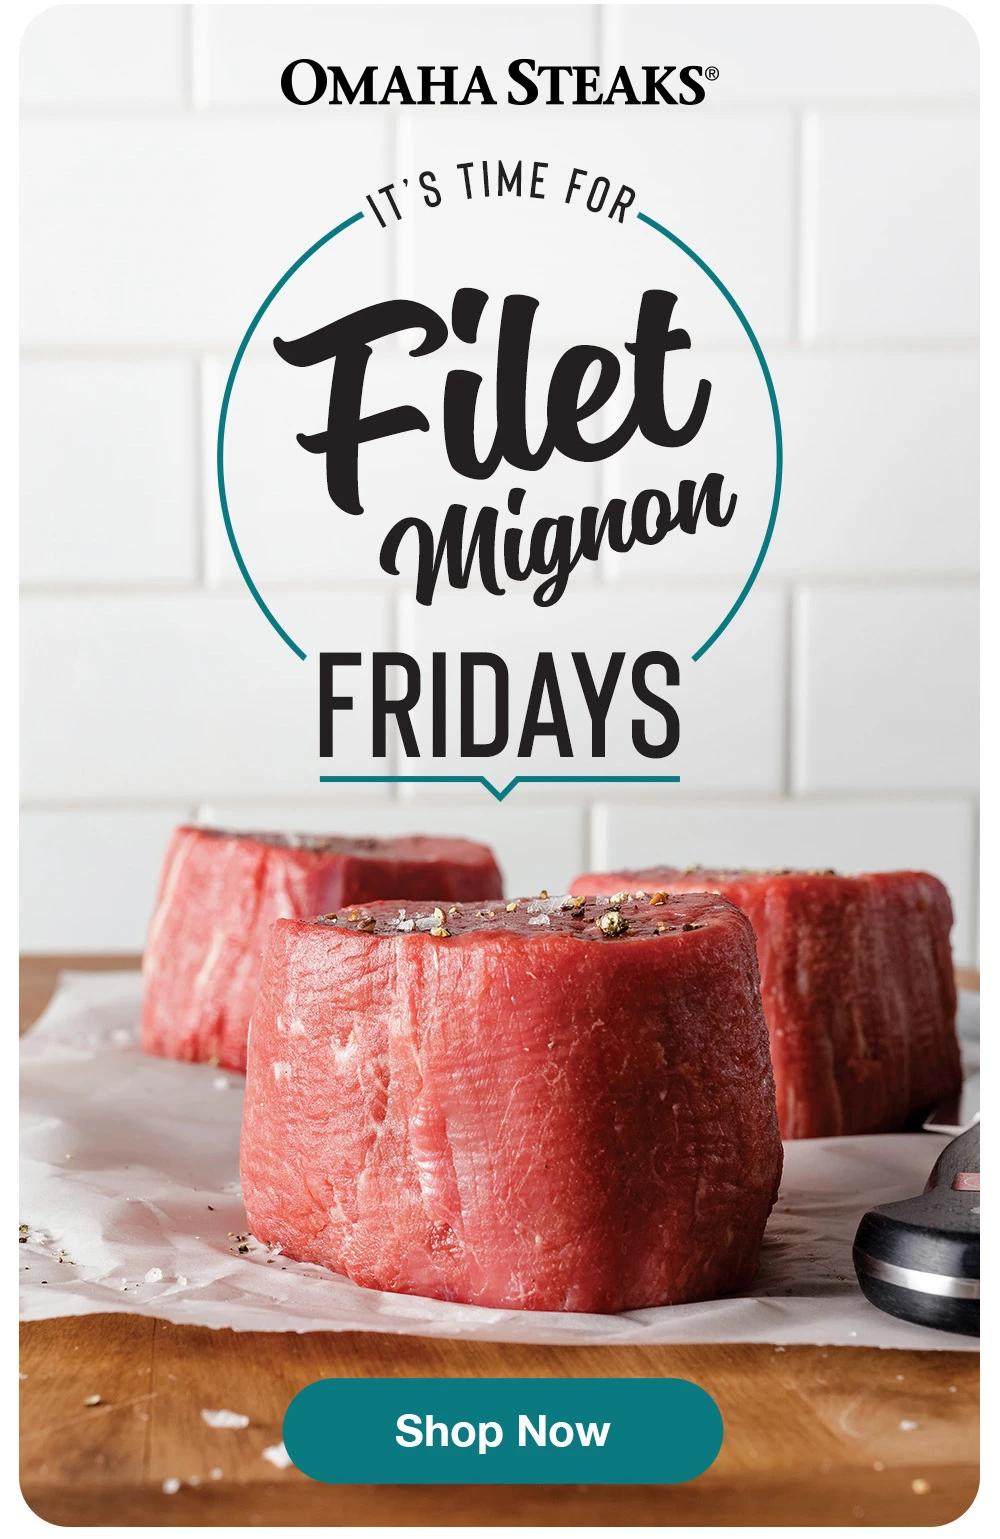 Omaha Steaks® | IT'S TIME FOR FILET MIGNON FRIDAYS || SHOP NOW